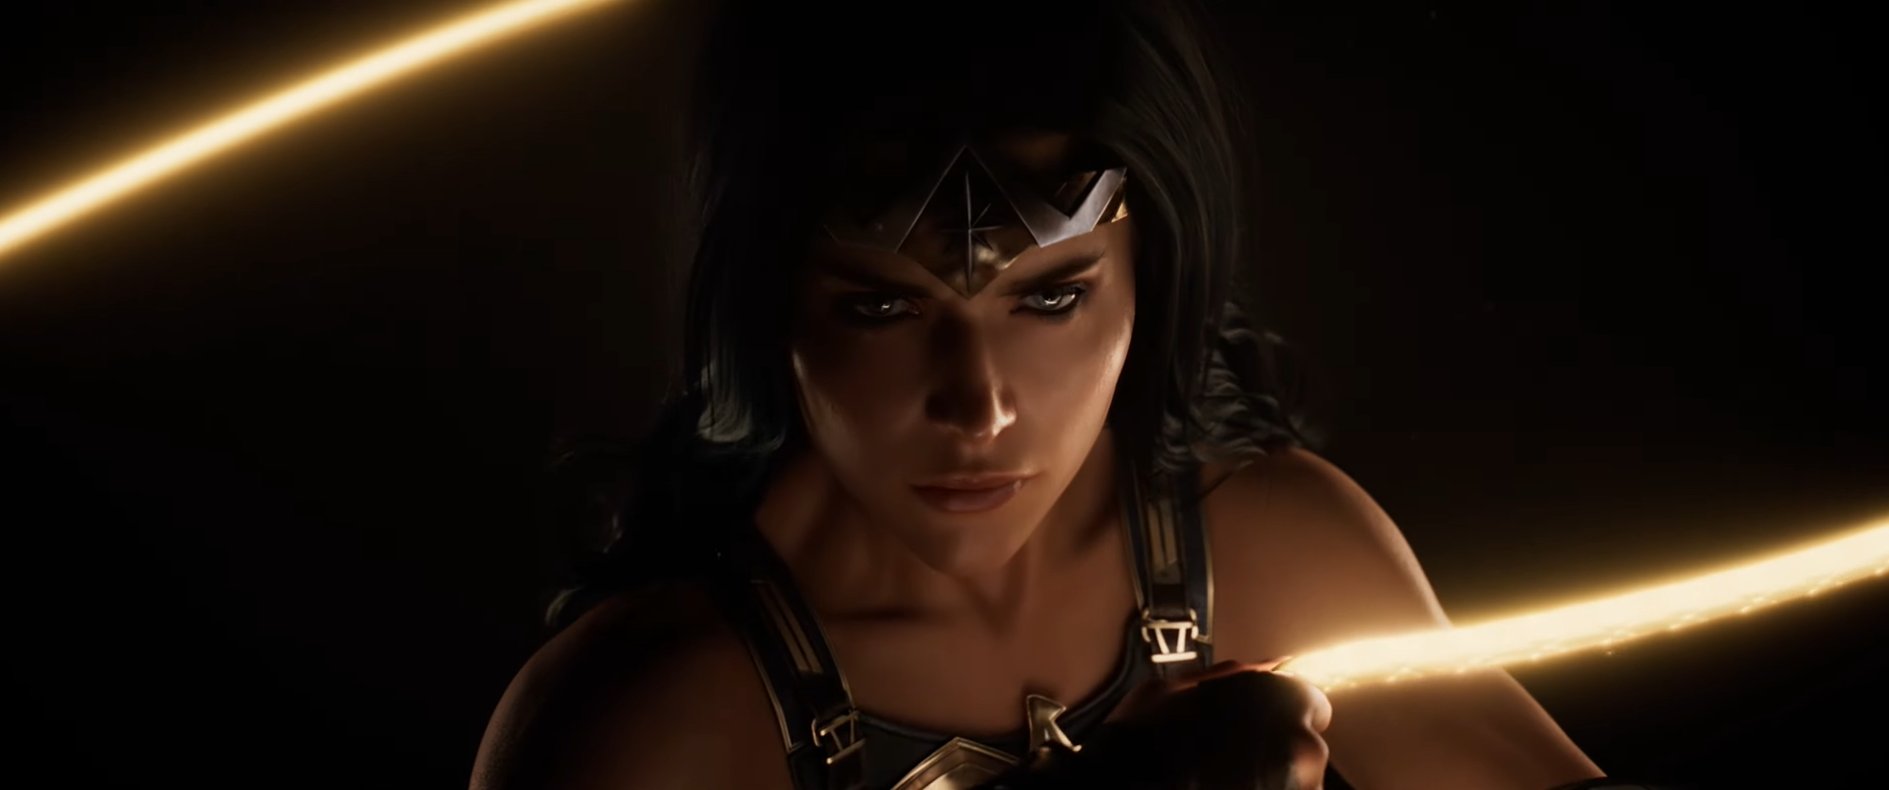 WONDER WOMAN Game From MIDDLE-EARTH: SHADOW OF WAR Developer Monolith Officially Announced